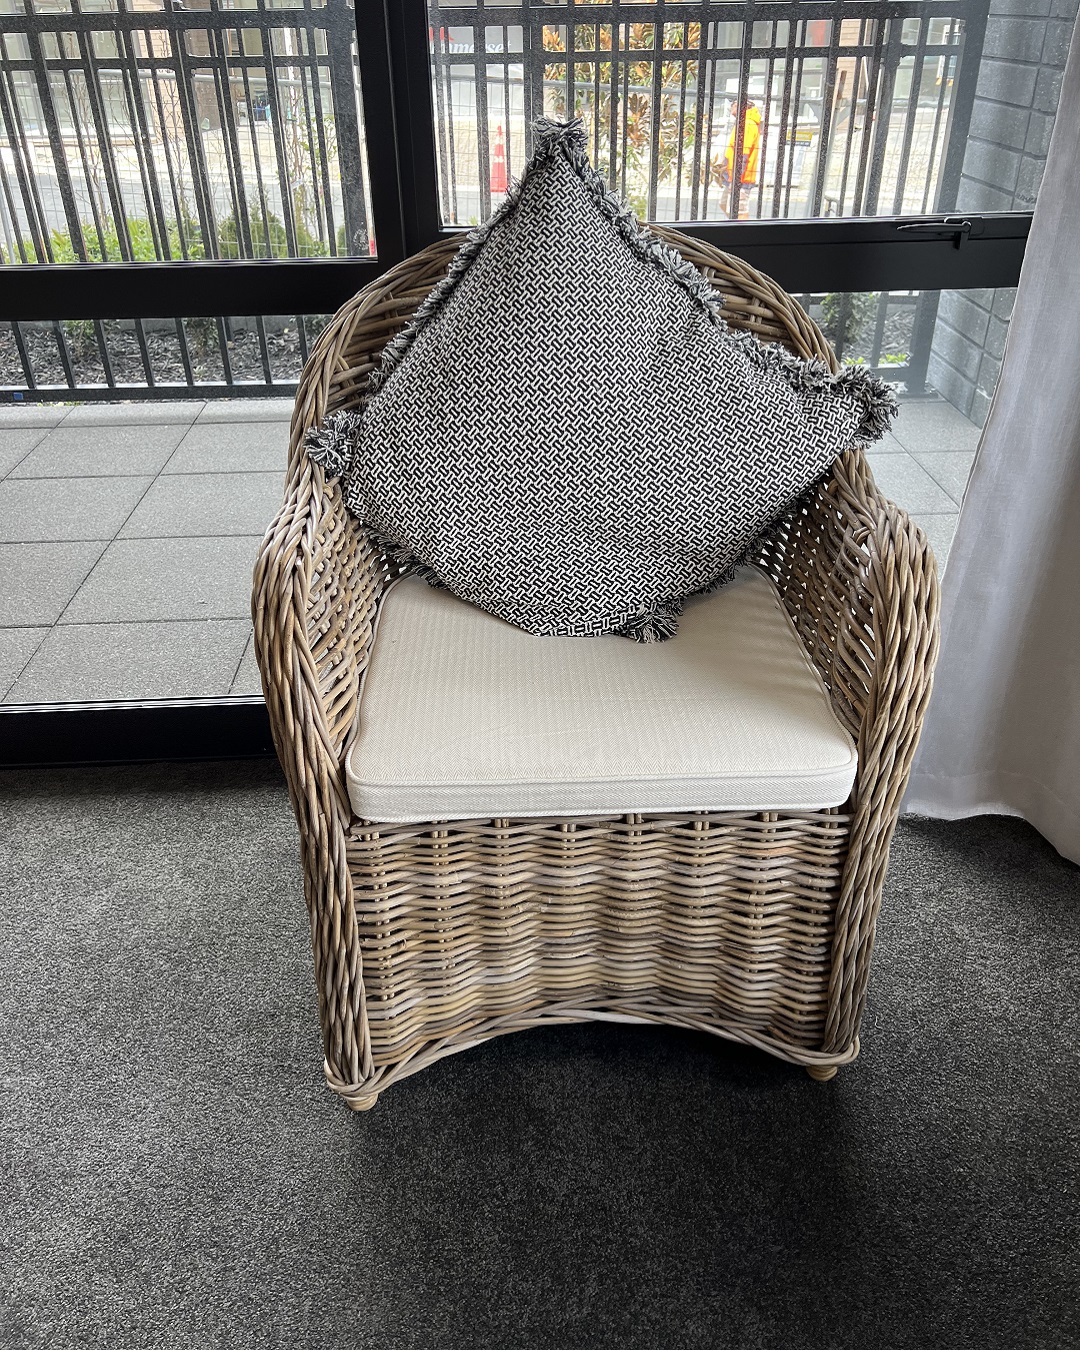 2 cane wicker indoor chairs and padded cushions